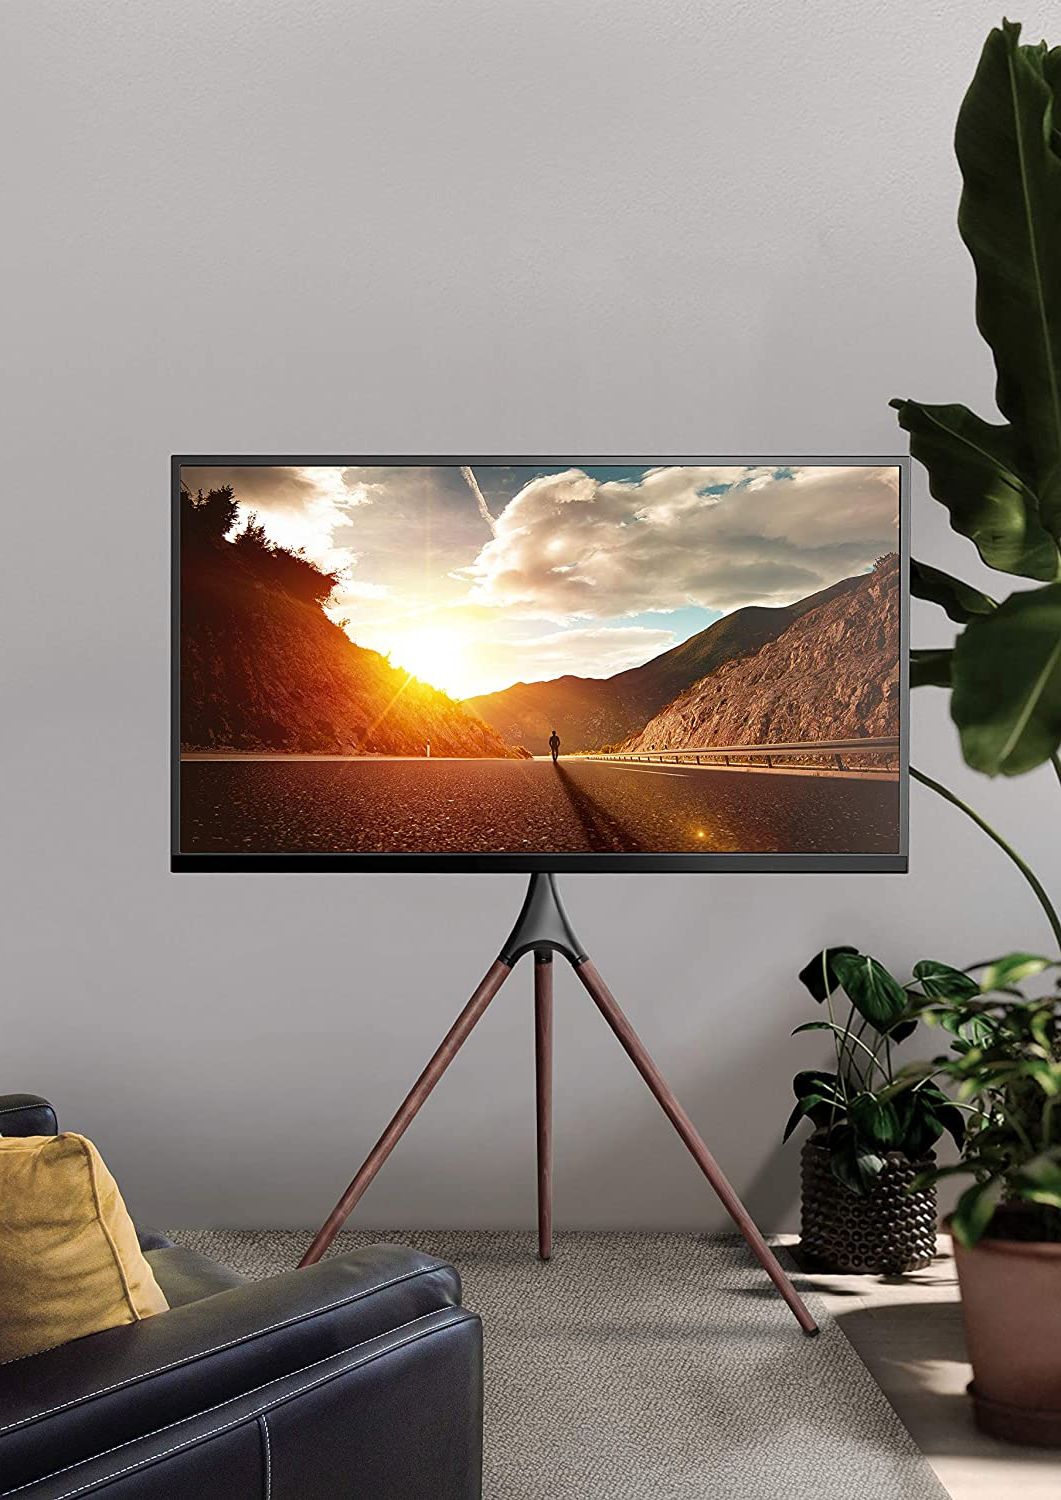 Newest The Best Affordable Tv Stands From Amazon, According To Interior Designers (View 7 of 10)